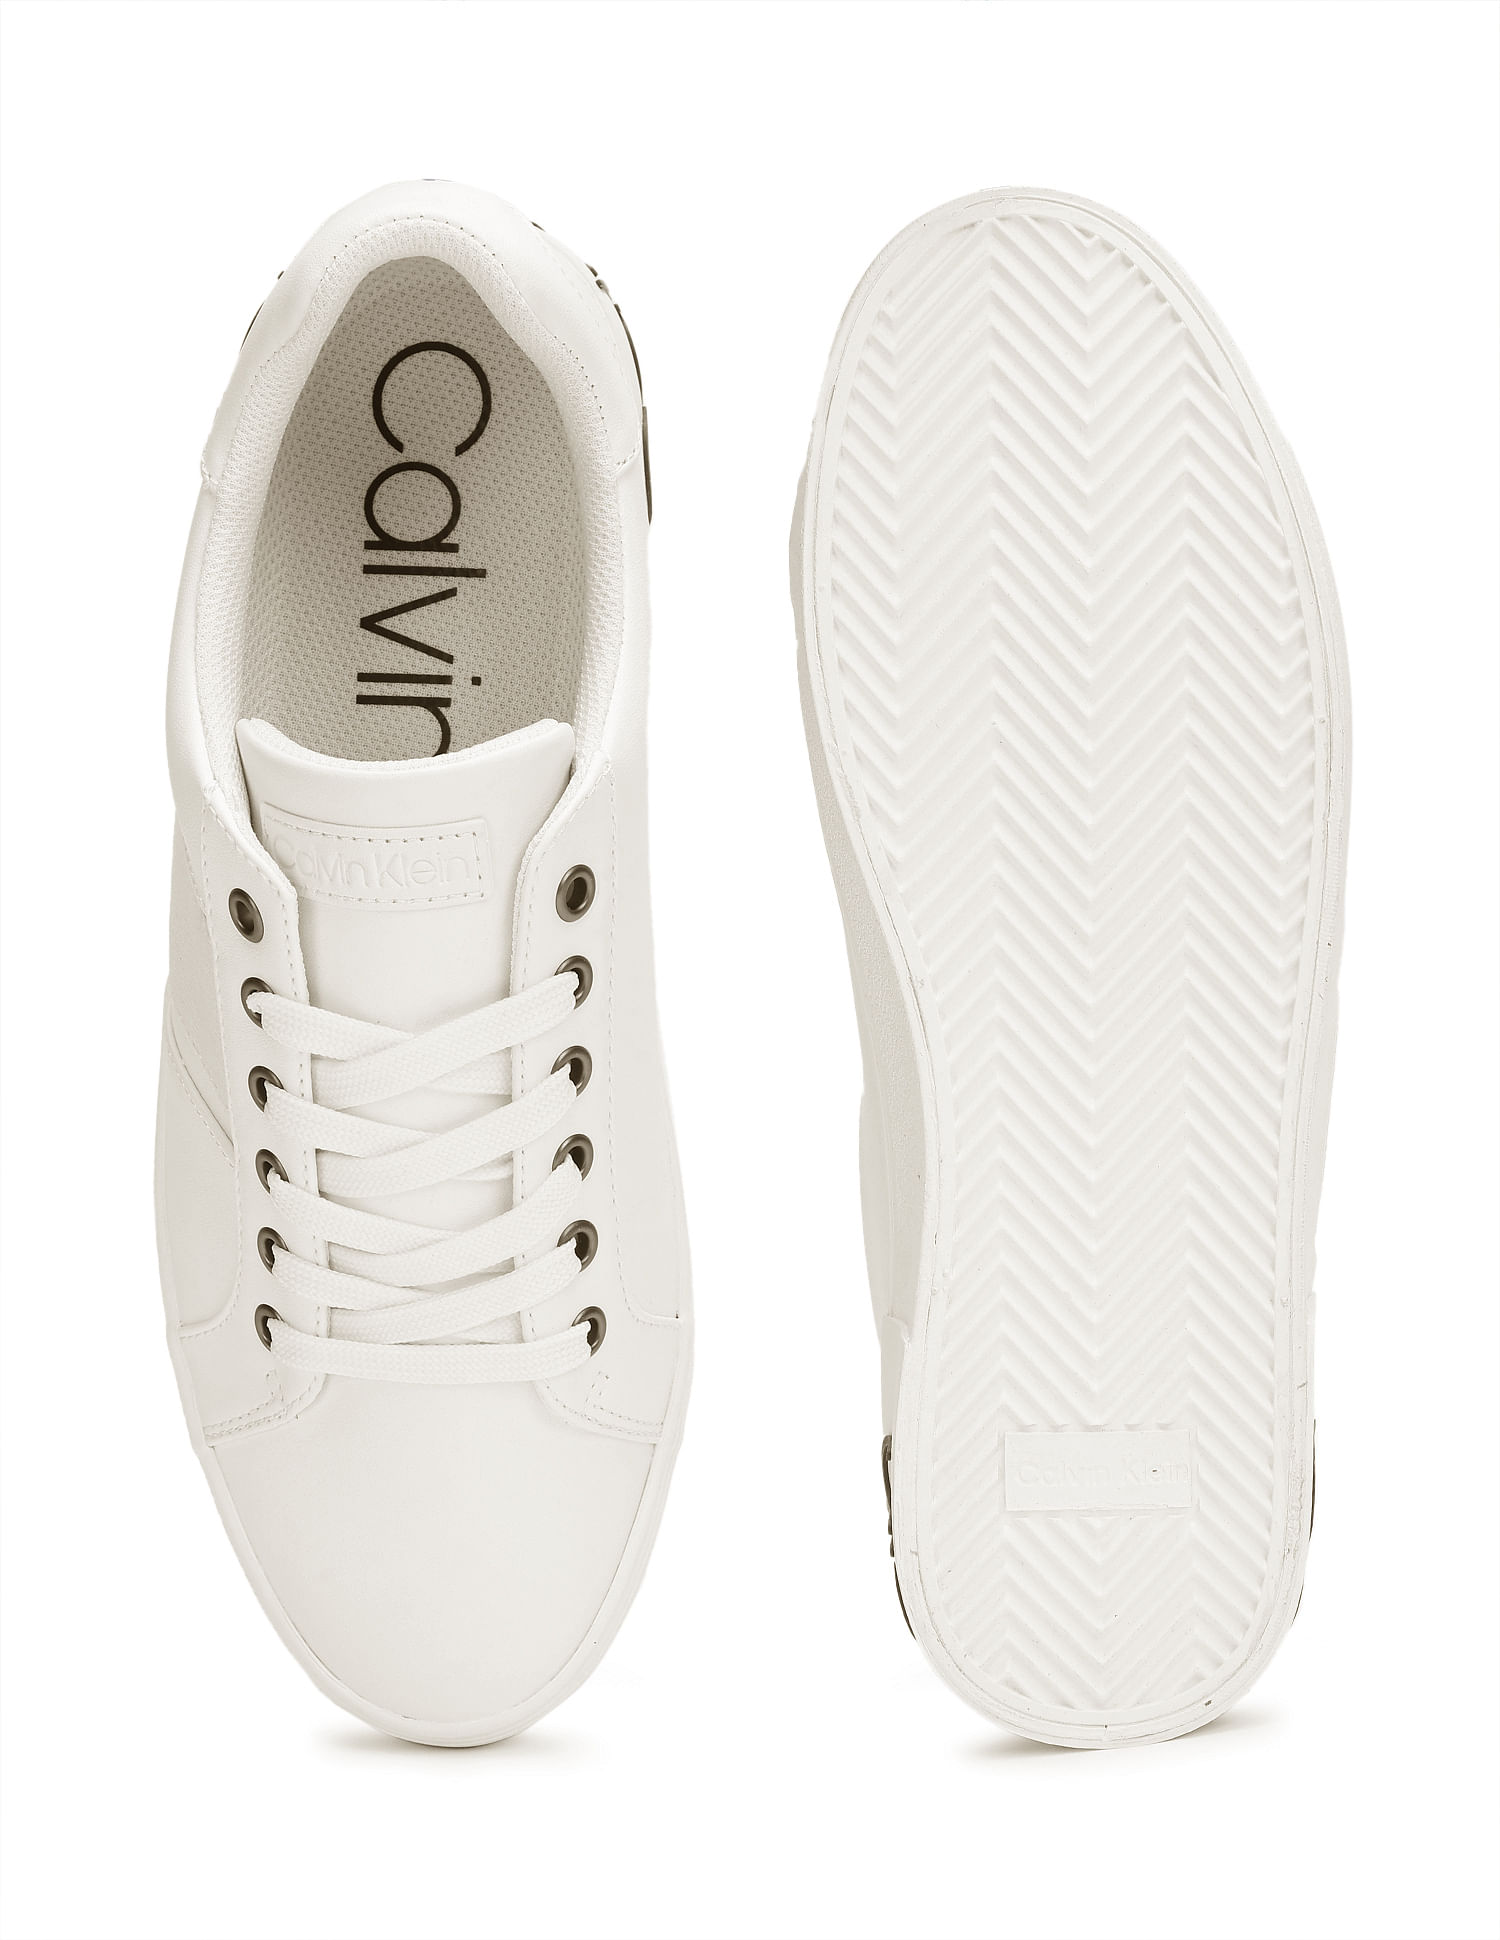 Calvin Klein Shoes Womens 9.5 Monna Casual Low Sneakers White Fabric Lace  Up